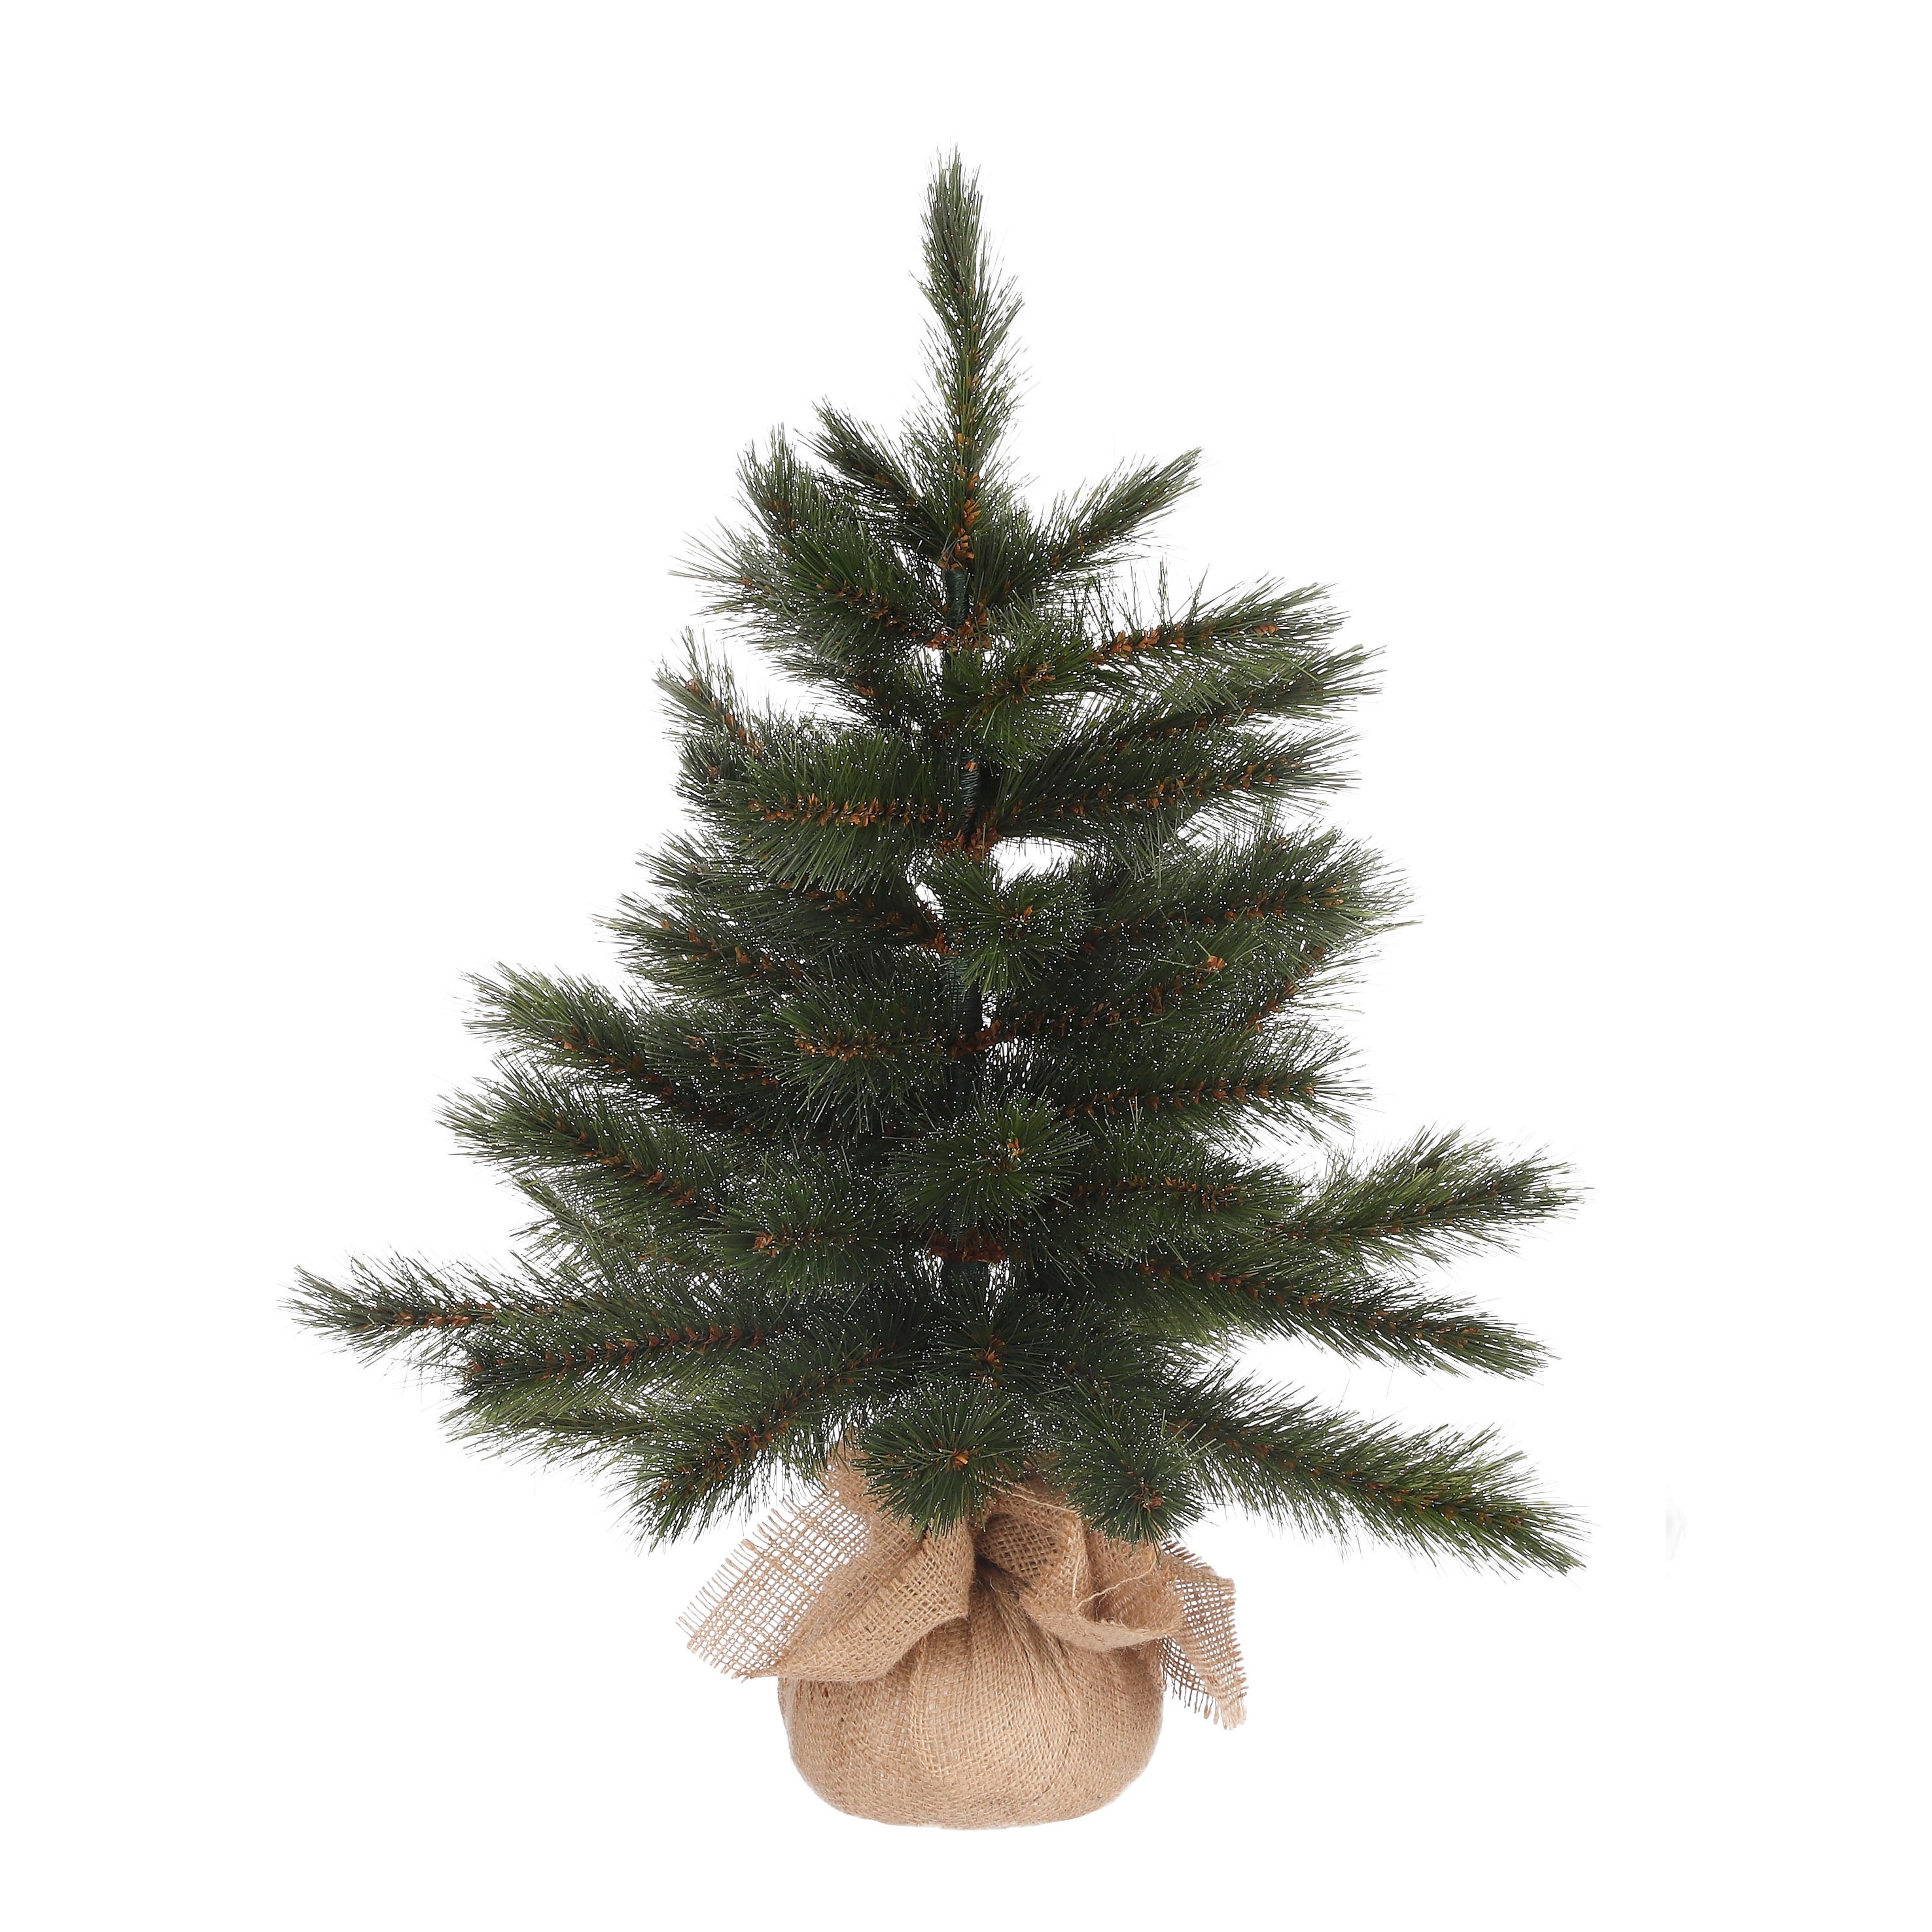 Sapin artificiel Forest frosted vert - 90 cm - Triumph Tree 